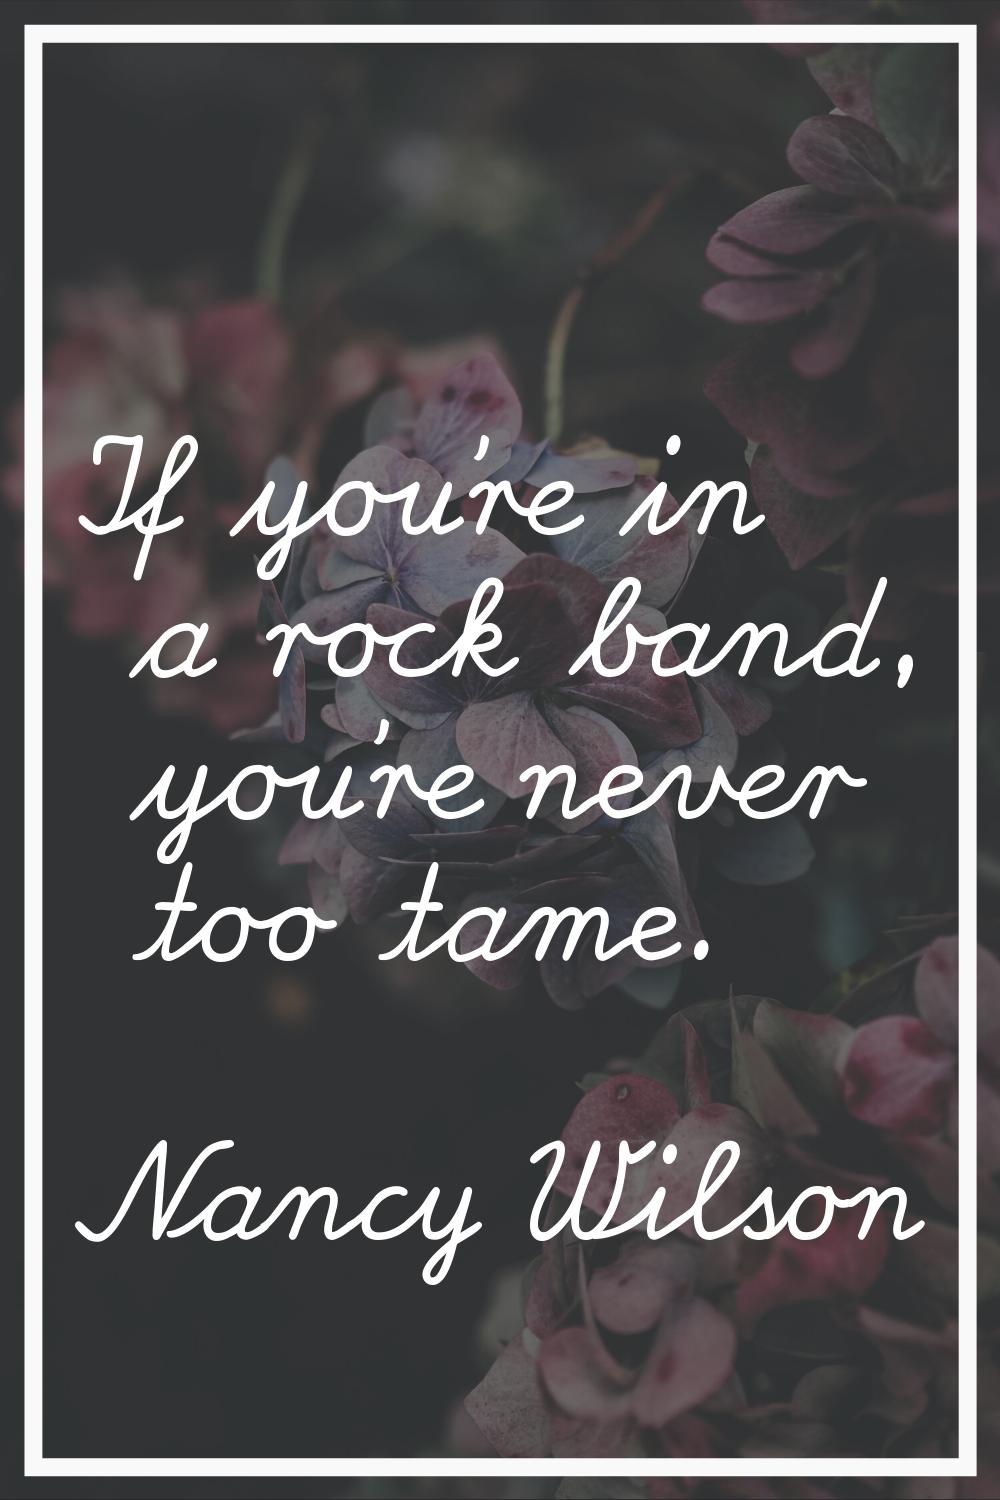 If you're in a rock band, you're never too tame.